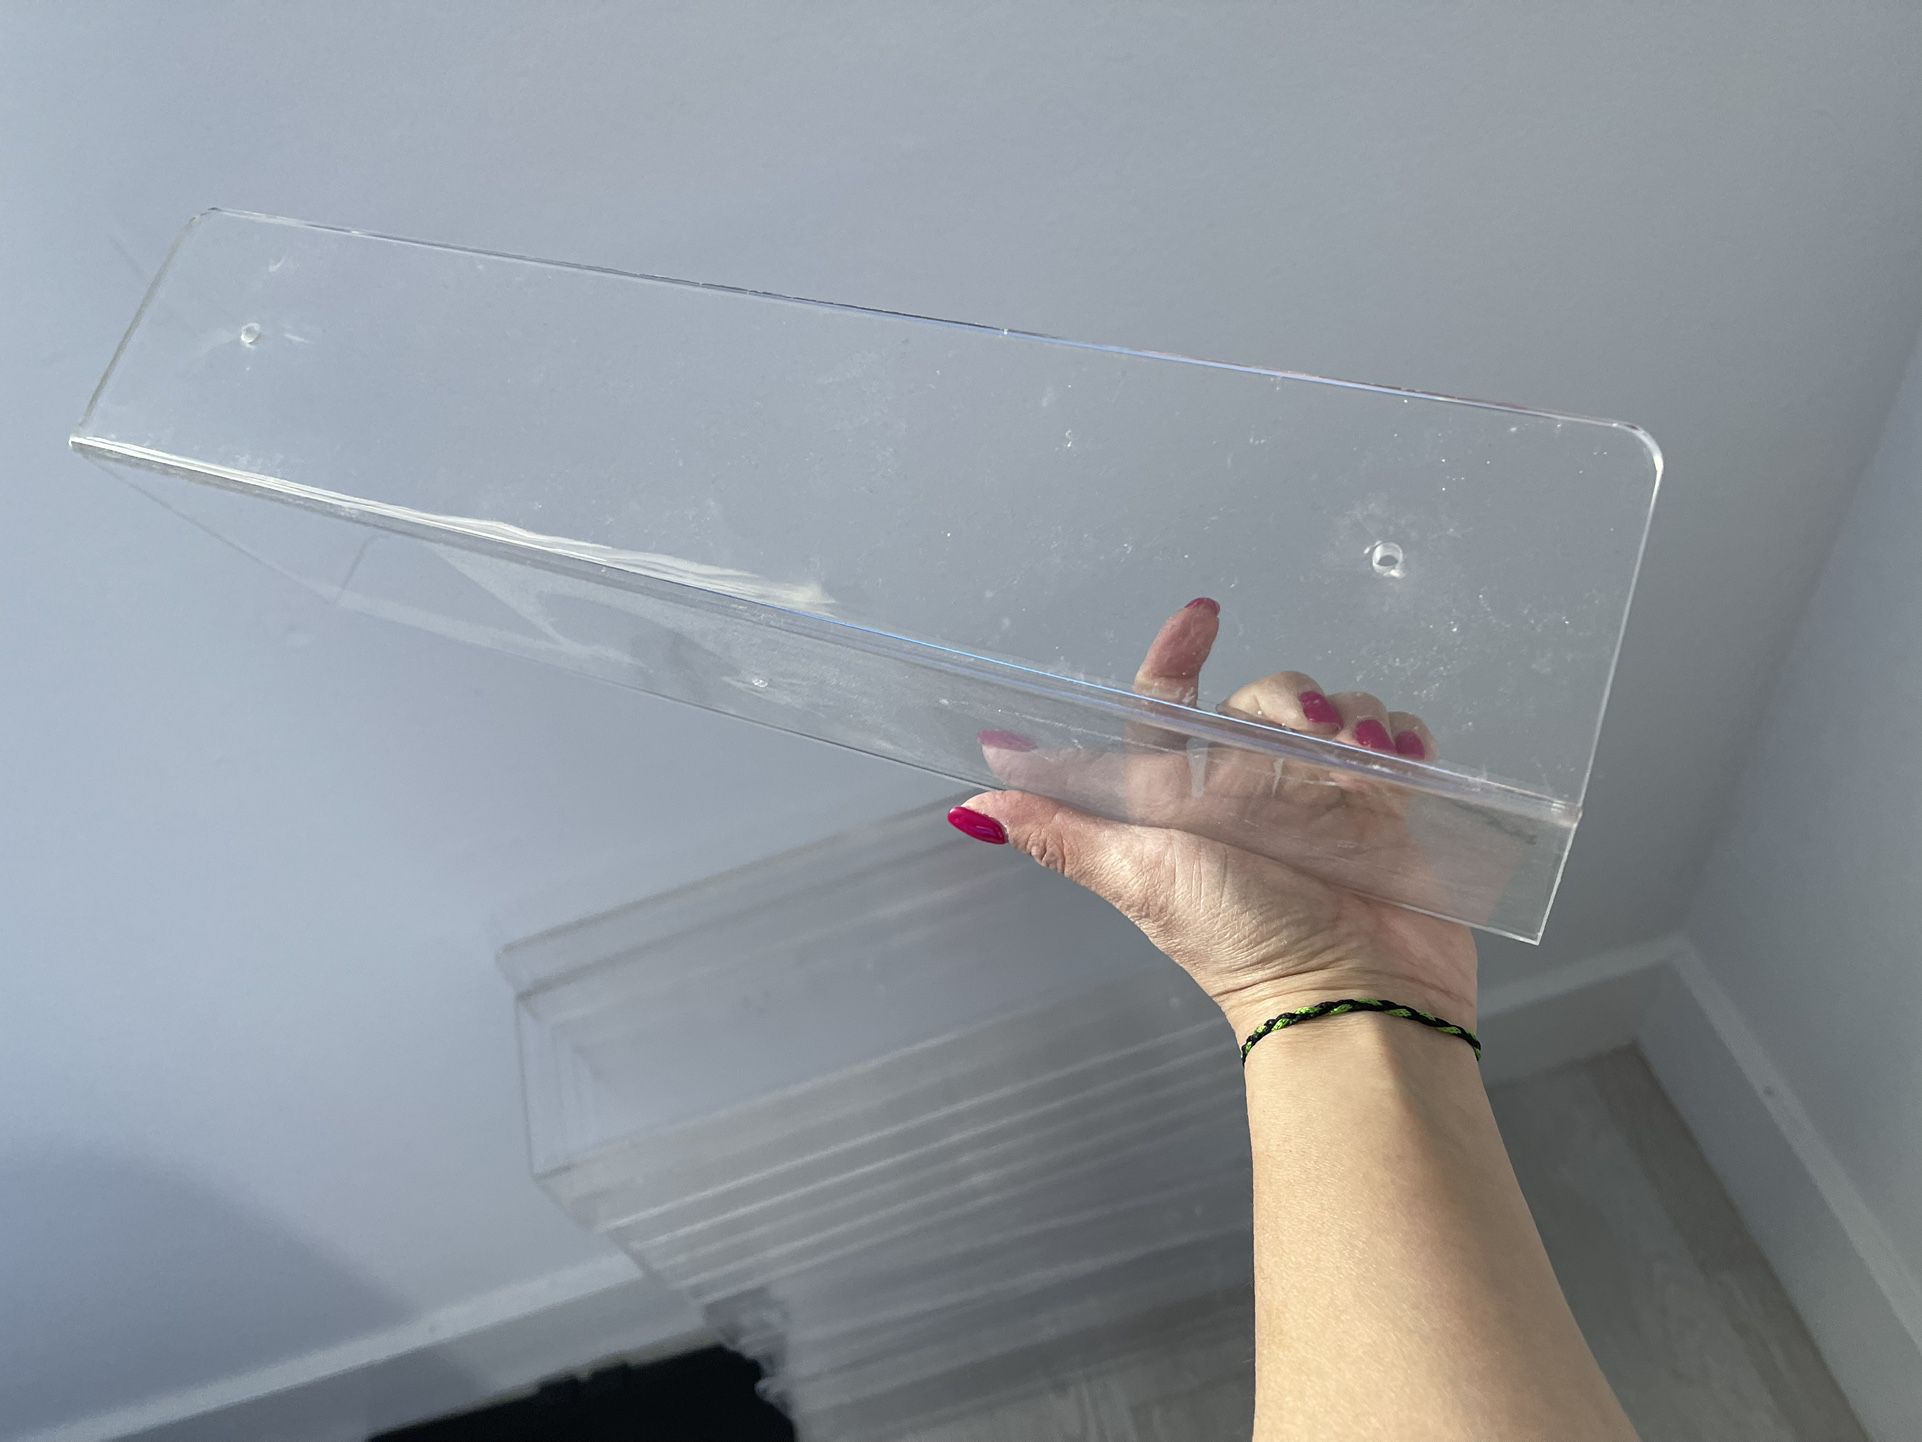 Acrylic Floating Shelves  4 For $5